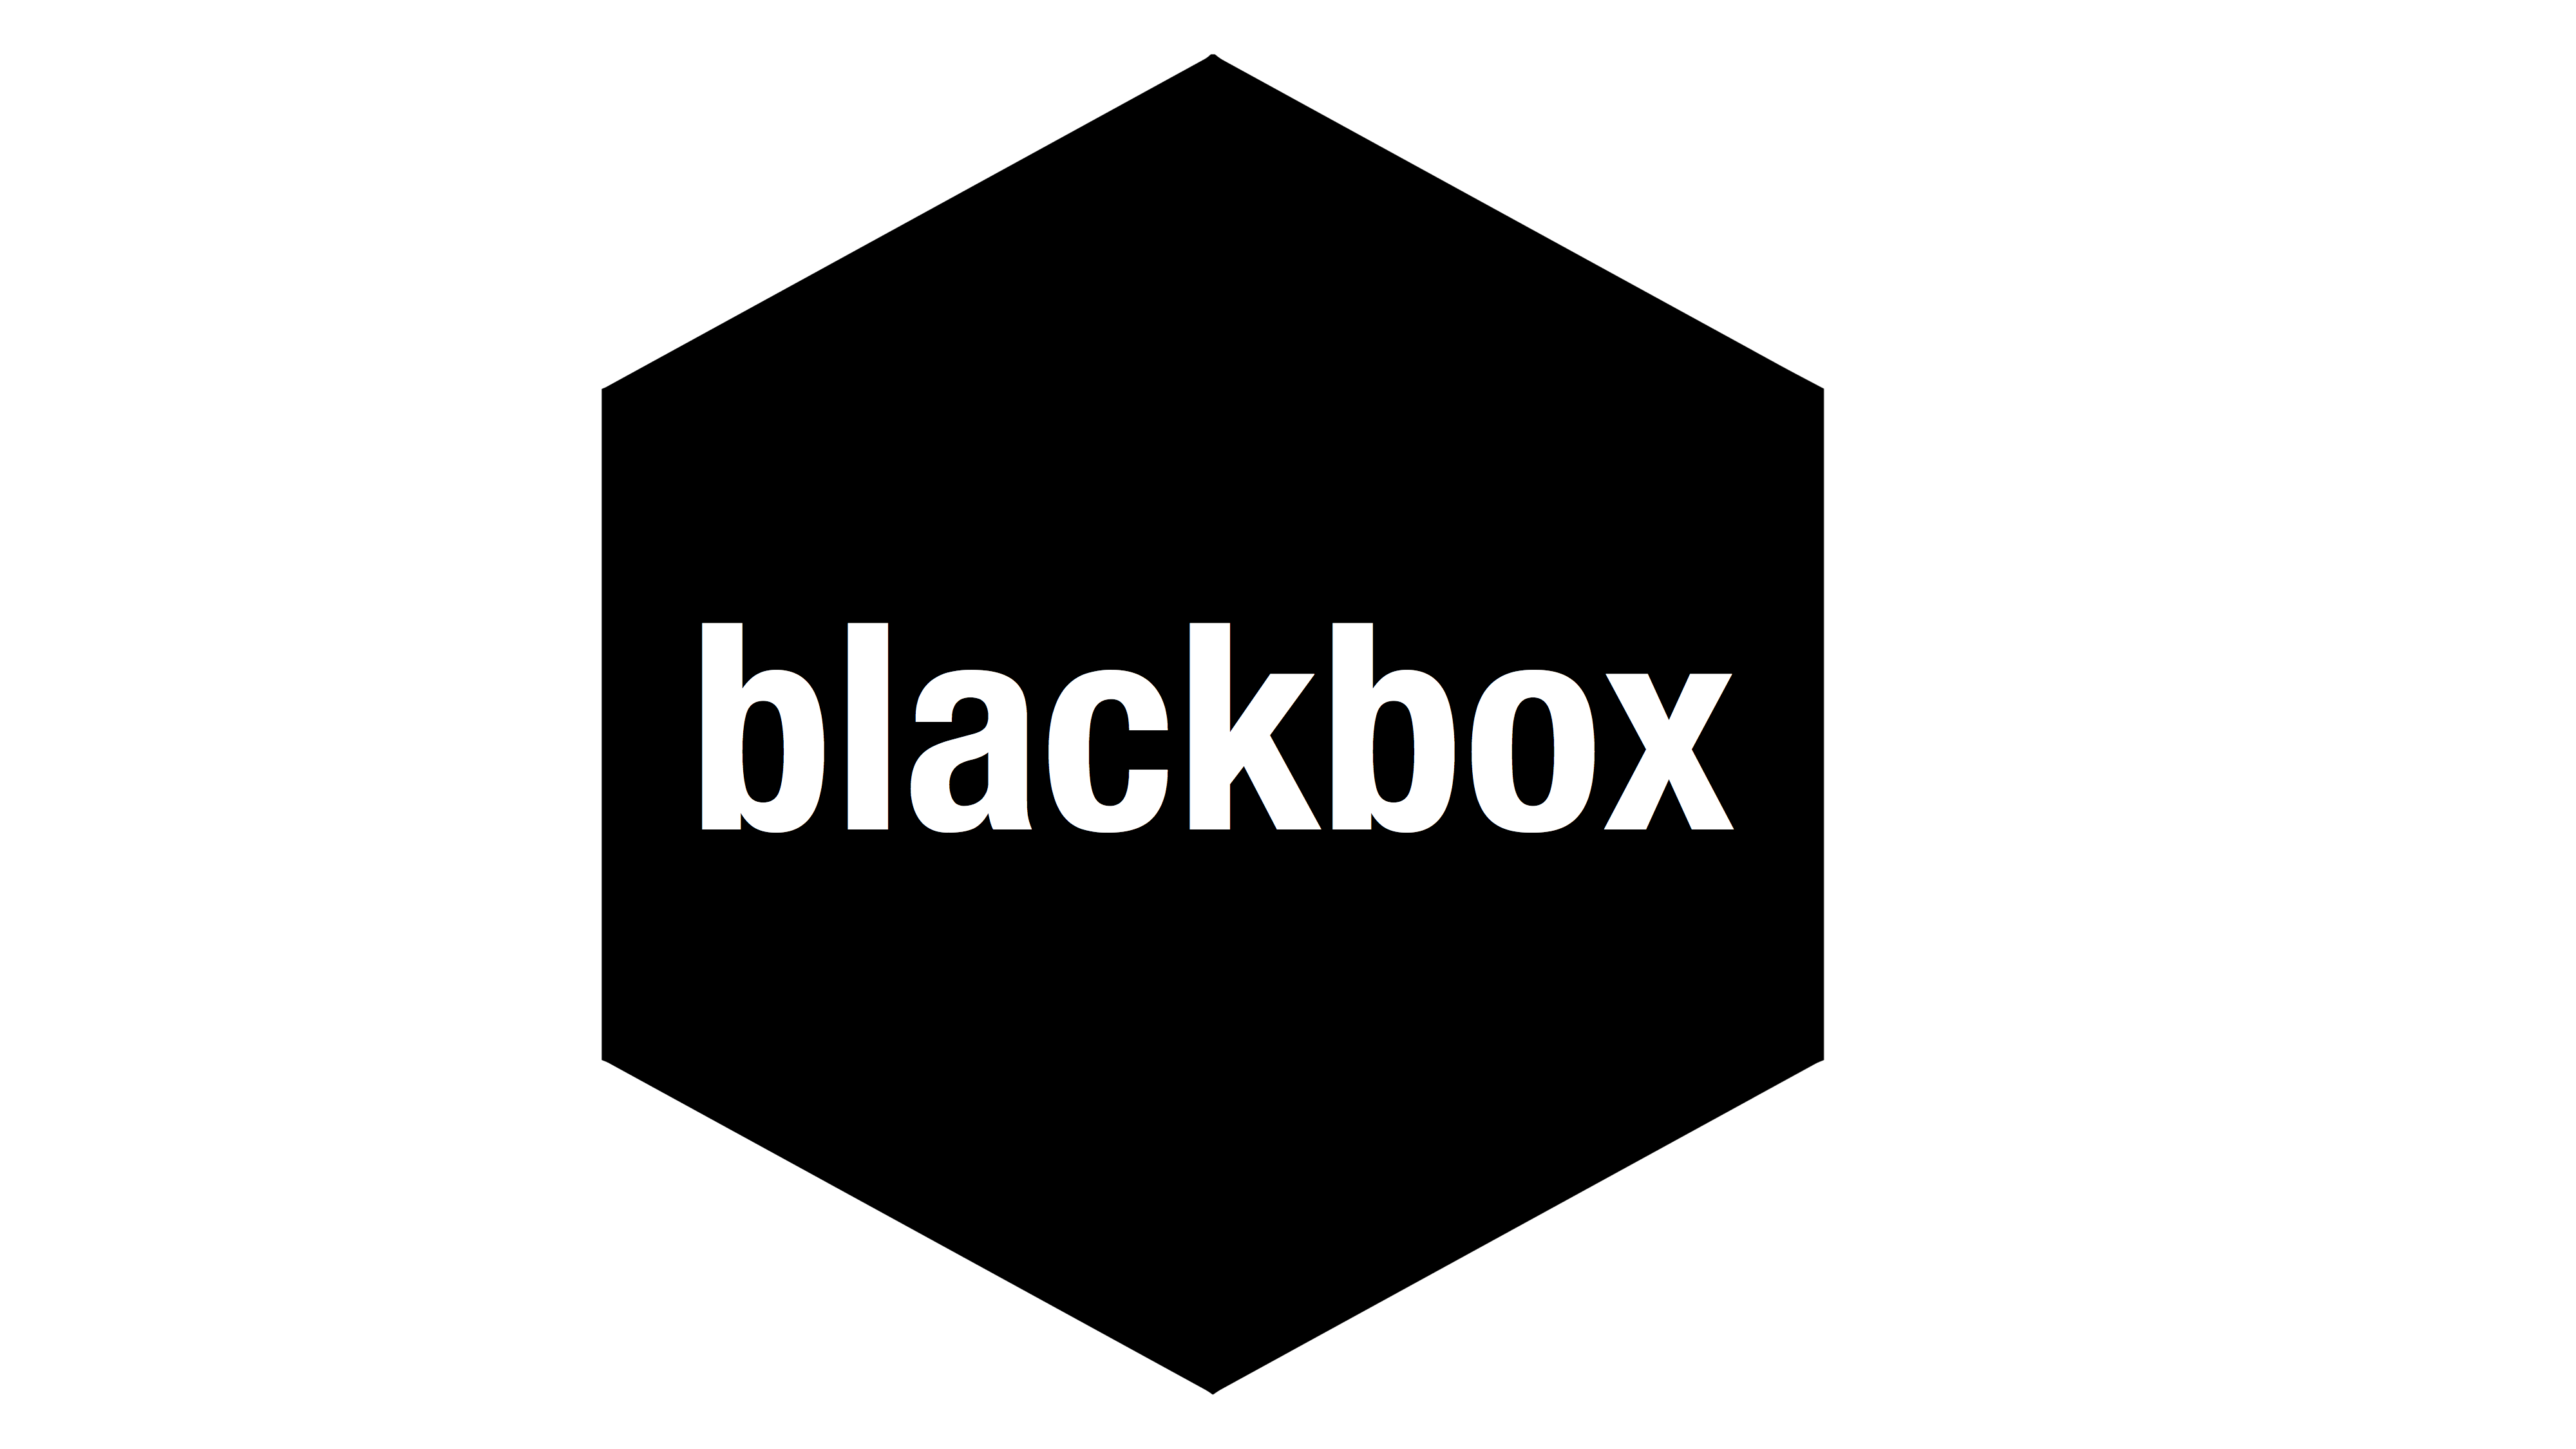 Webio Makes the Shortlist for Google’s Blackbox Connect 20 Programme in Silicon Valley